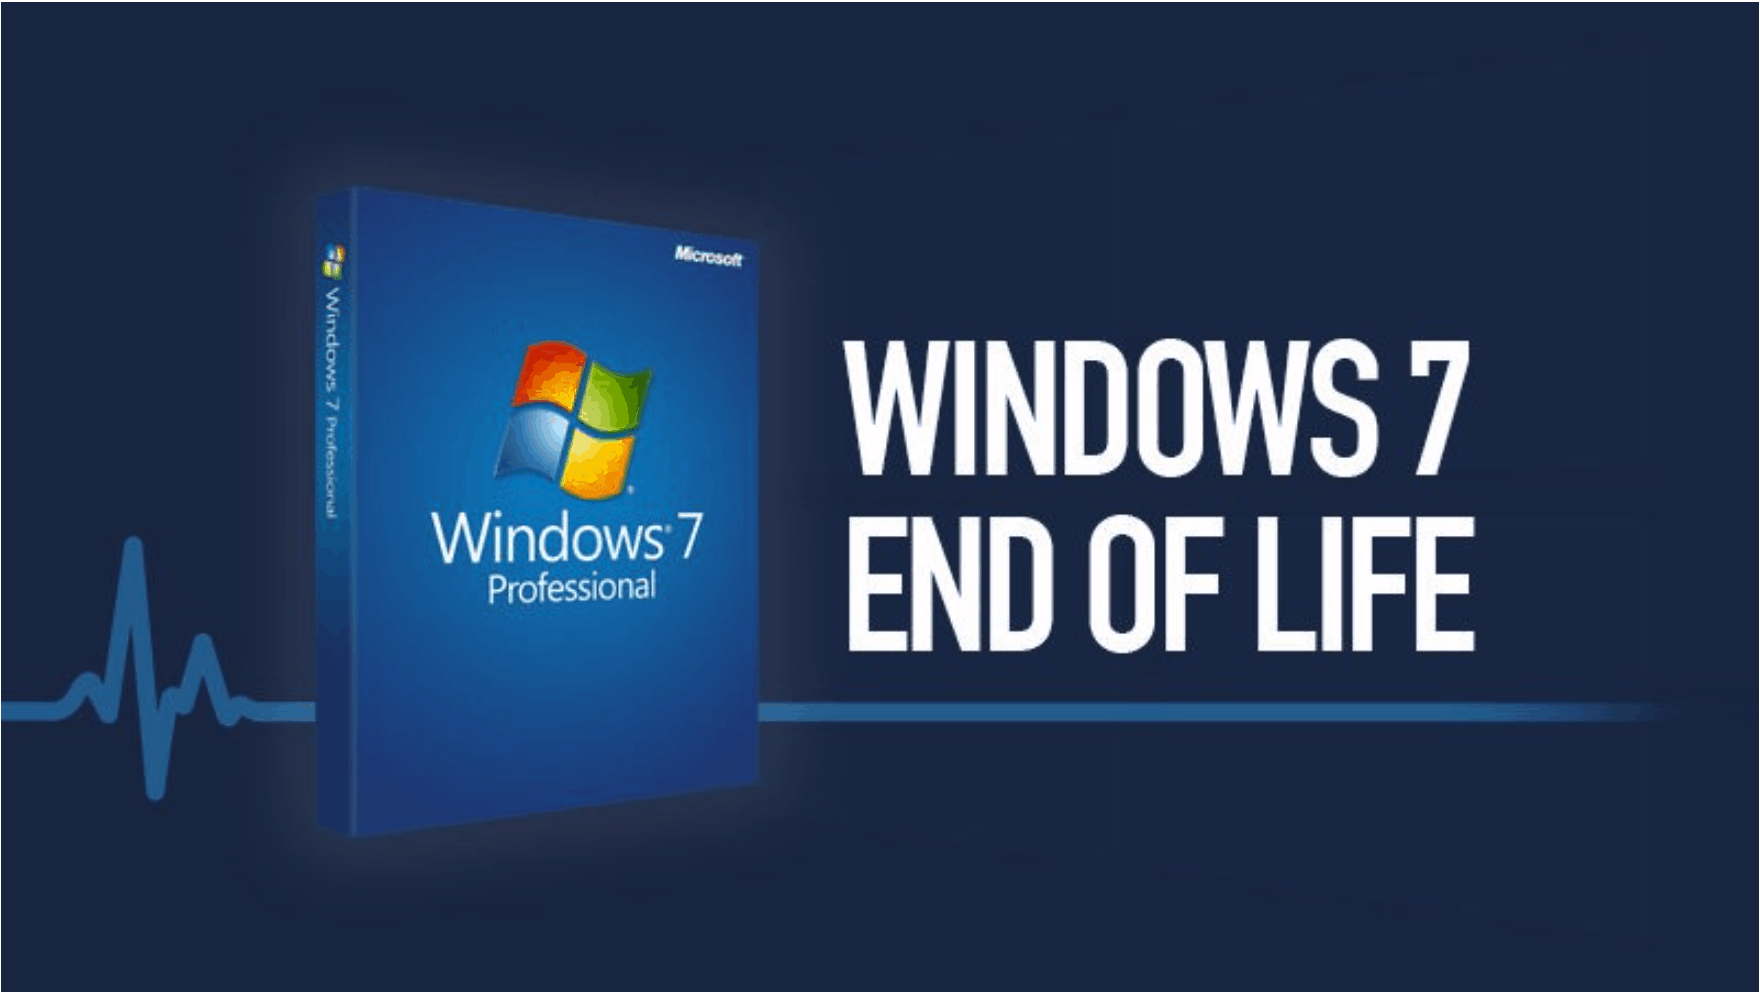 Are you prepared for Windows 7 End of Life?